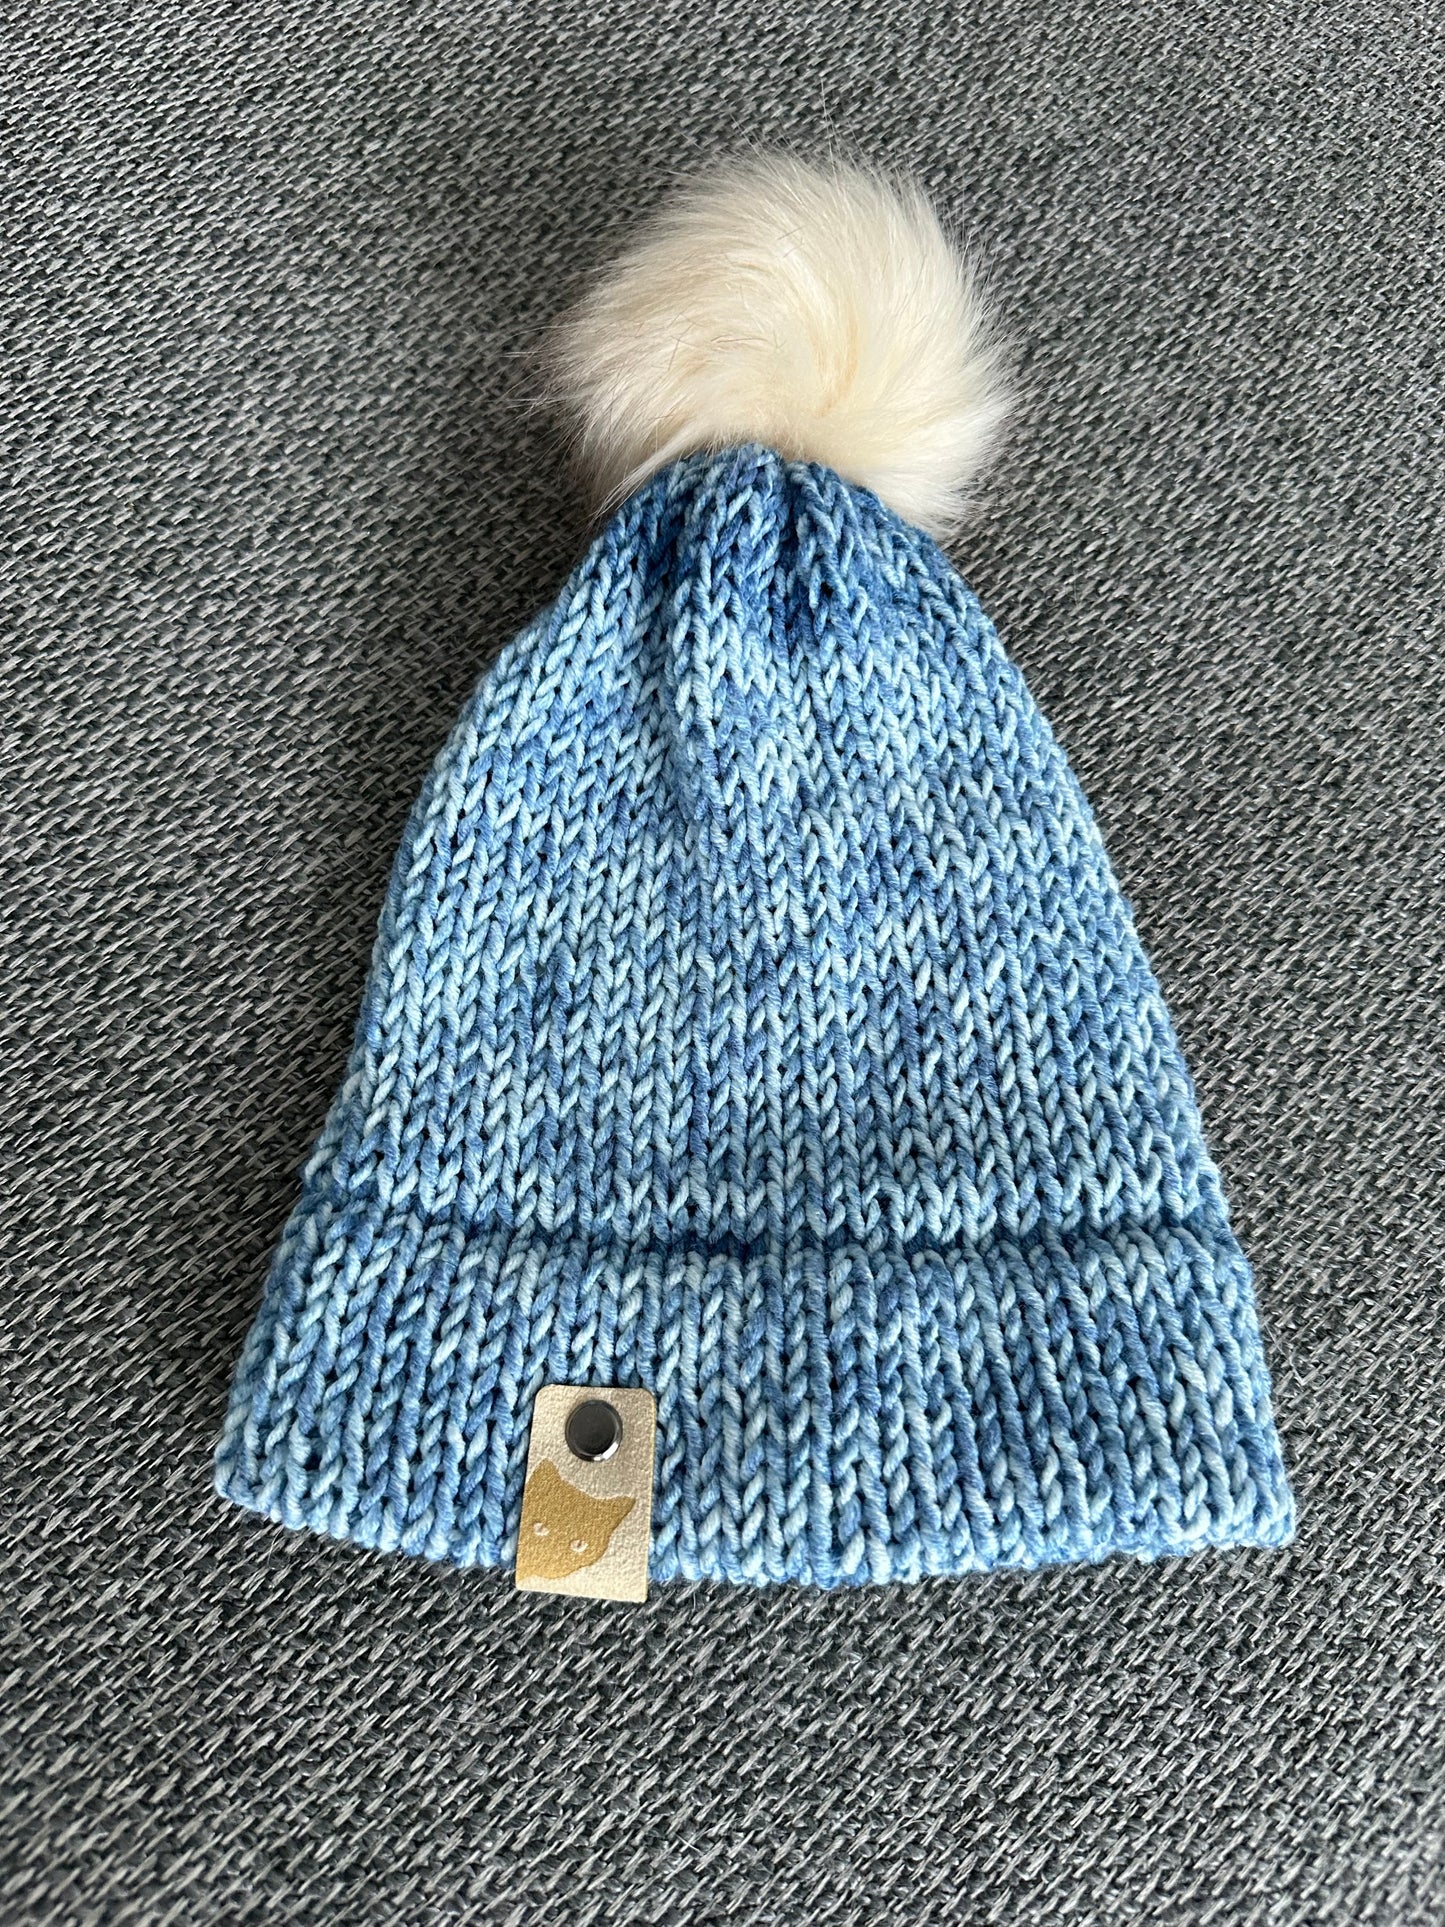 Hand Made Recycled Cotton Hat - Blues